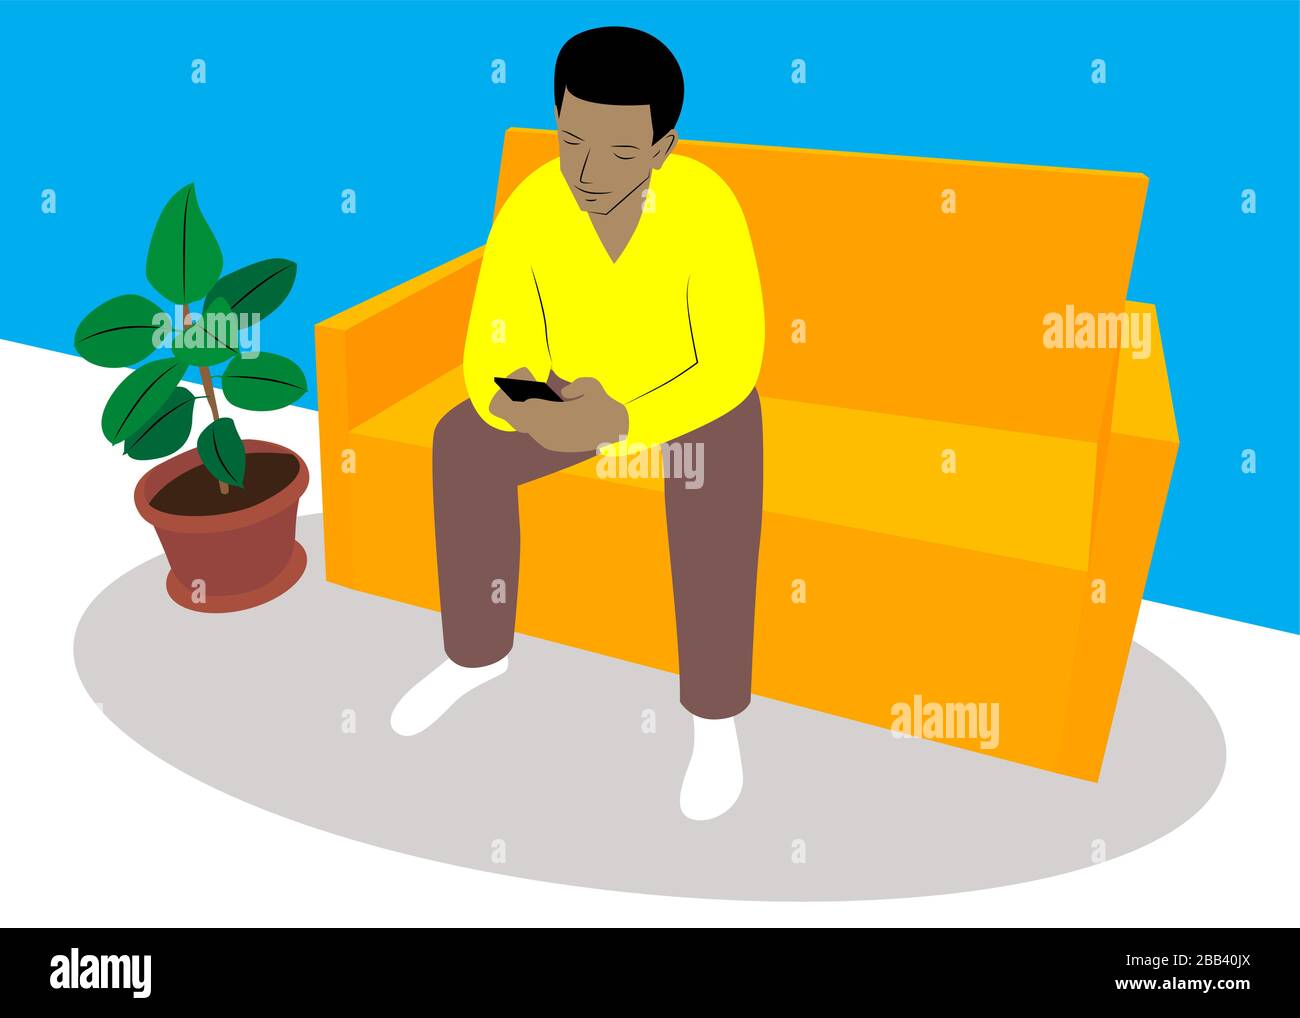 Black young man using smart phone while relaxing or working at home. Downloading app, surfing internet on mobile, messaging friends online and checkin Stock Vector